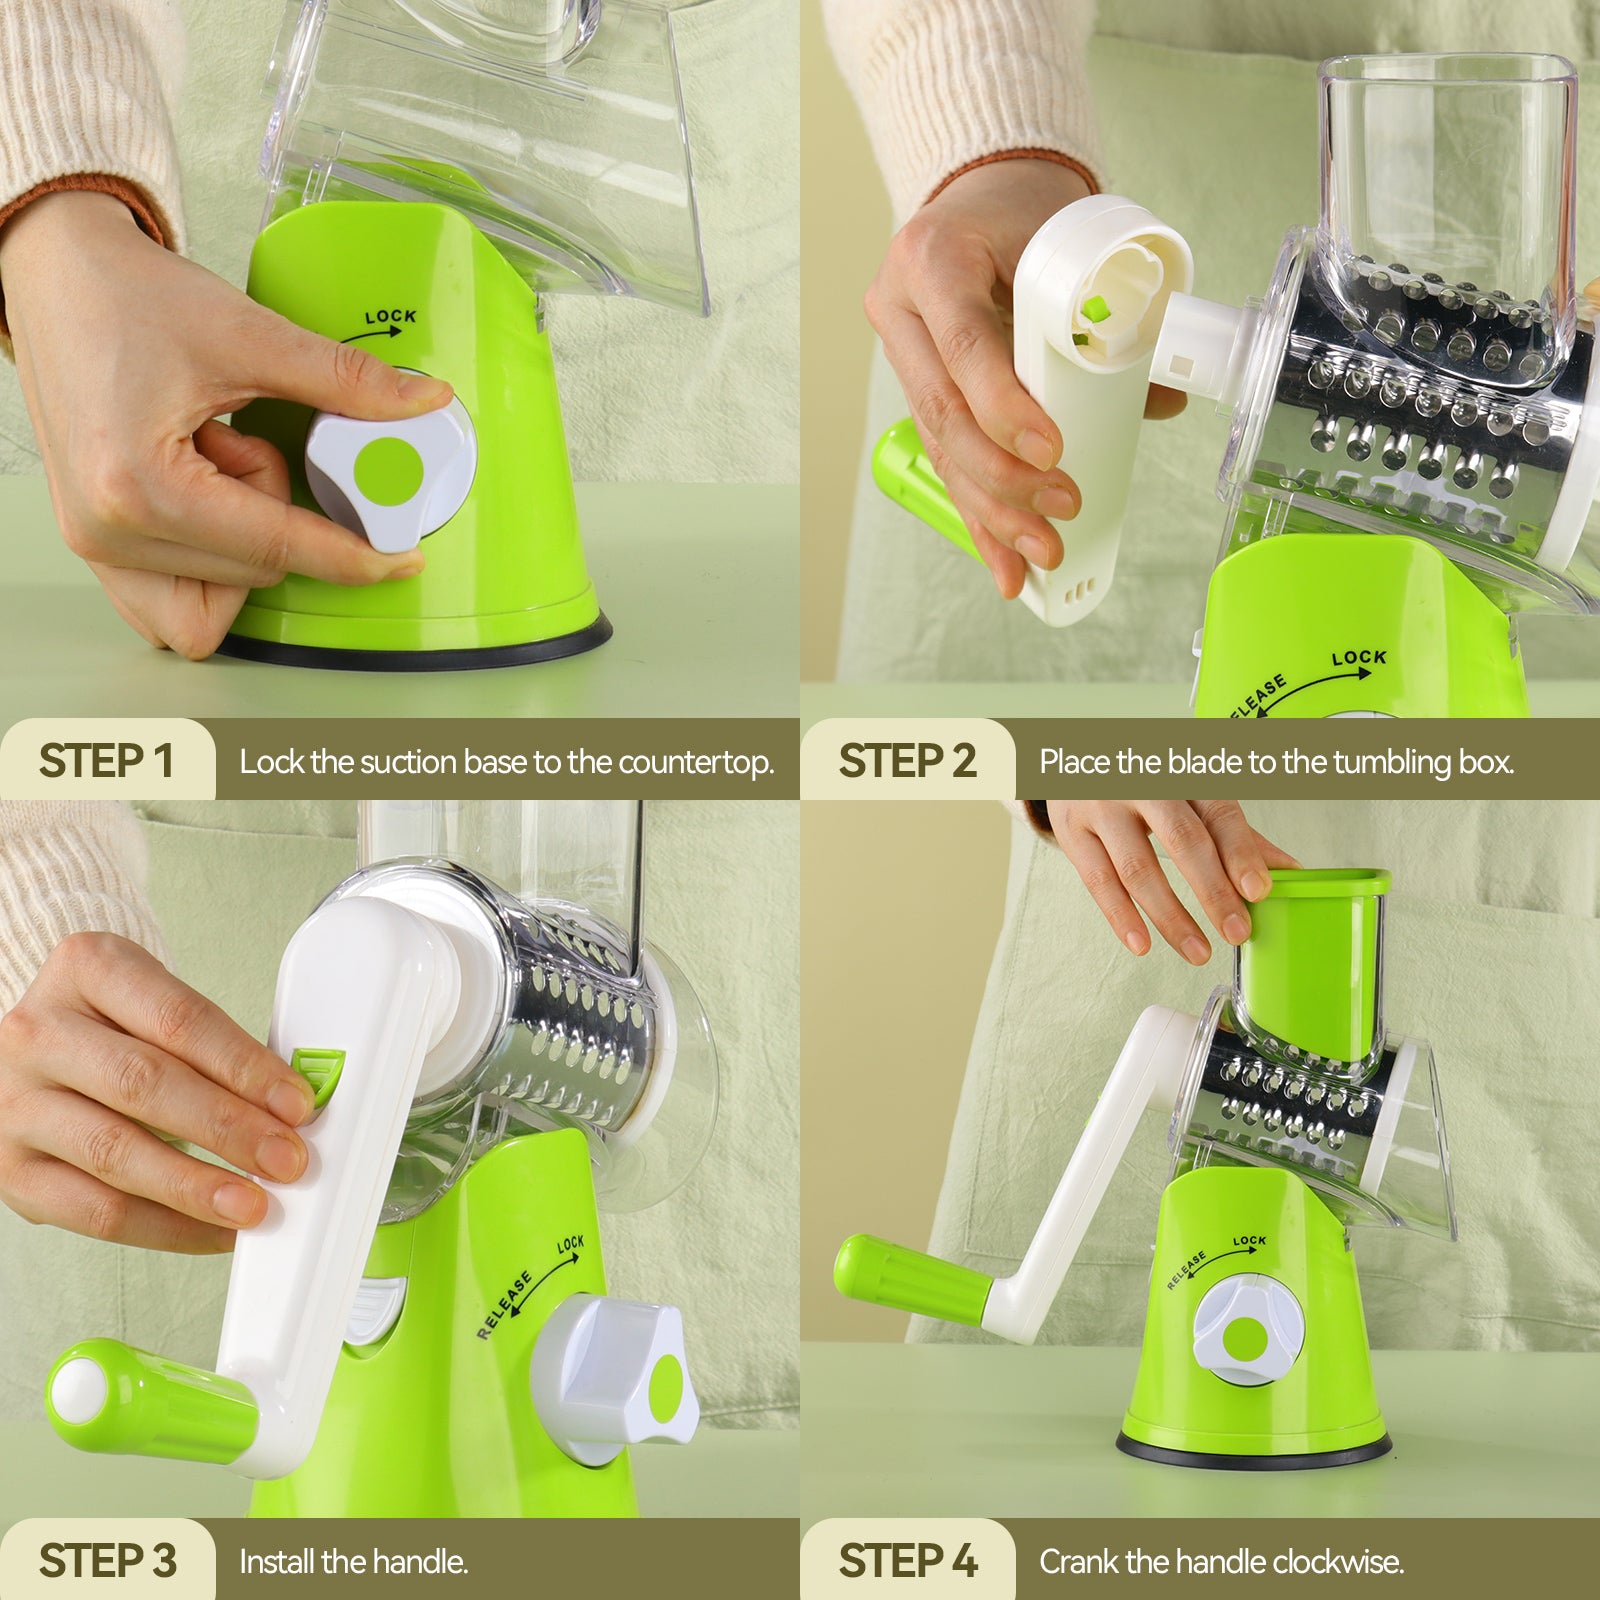 EDEFISY Cheese Grater - 3-in-1 Stainless Steel Manual Drum Slicer